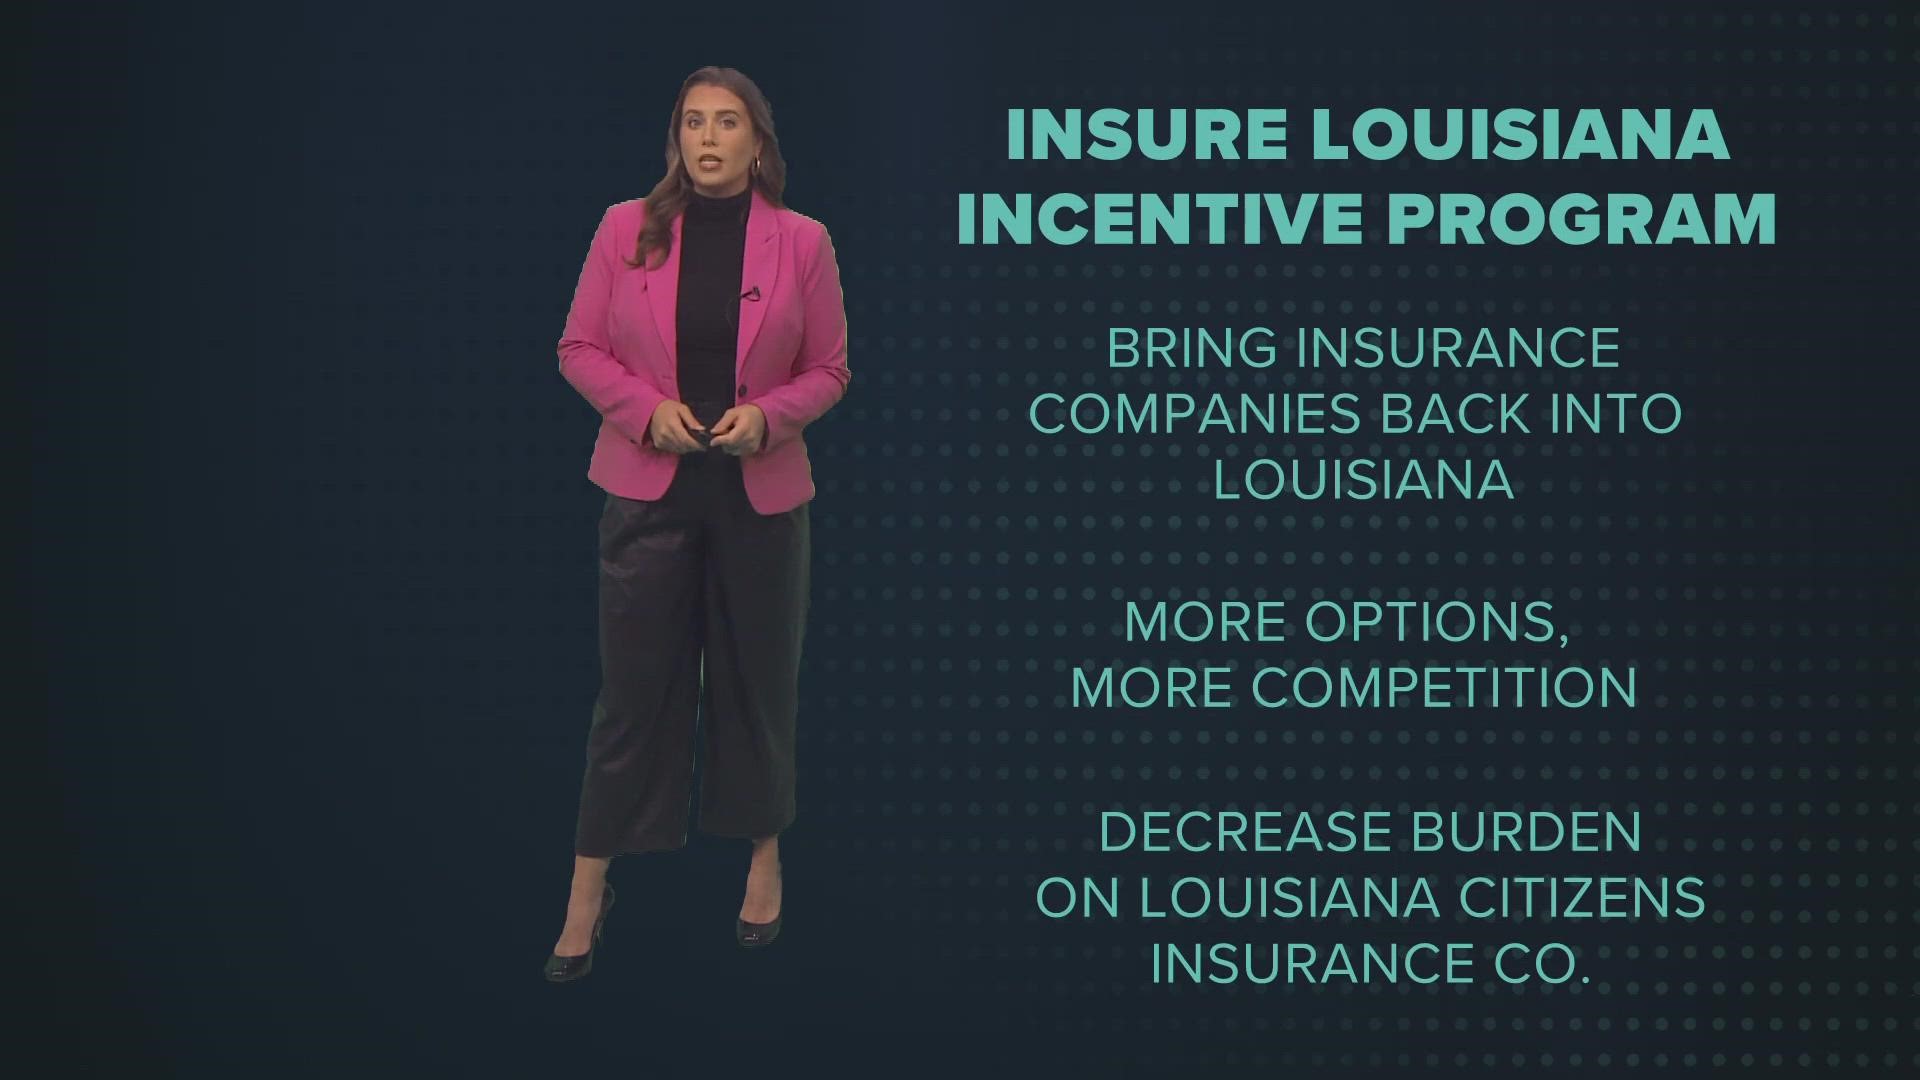 Tens of thousands of Louisianans were dumped by their homeowner’s insurance companies or their premiums went through the roof last year.